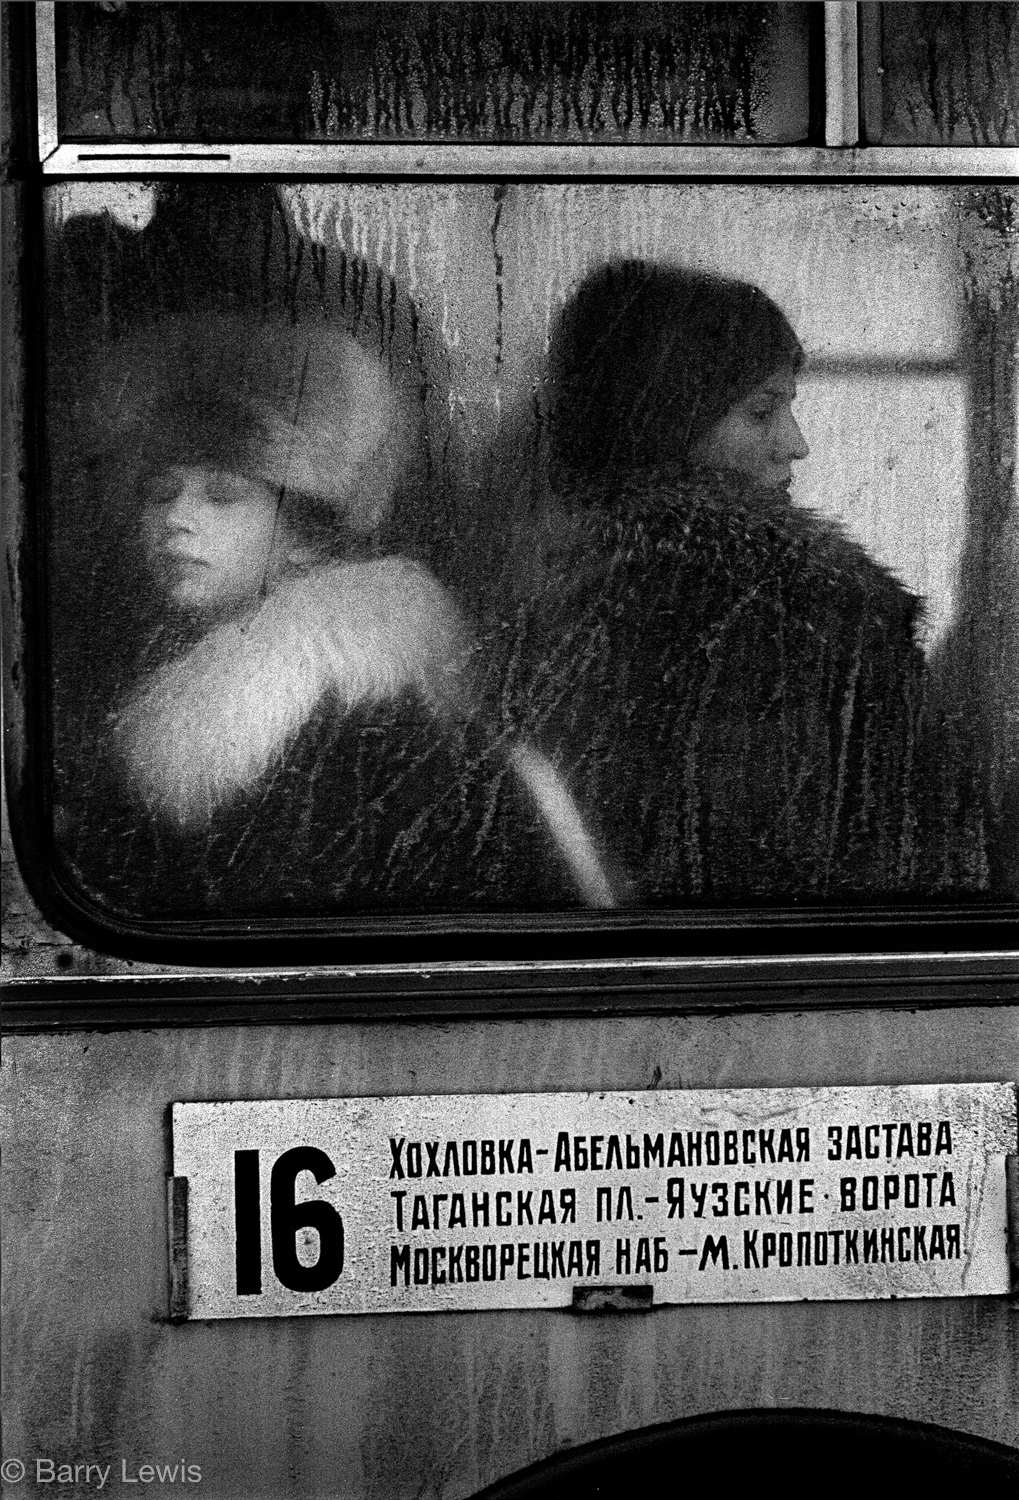  Number 16 bus, Moscow, 1972 